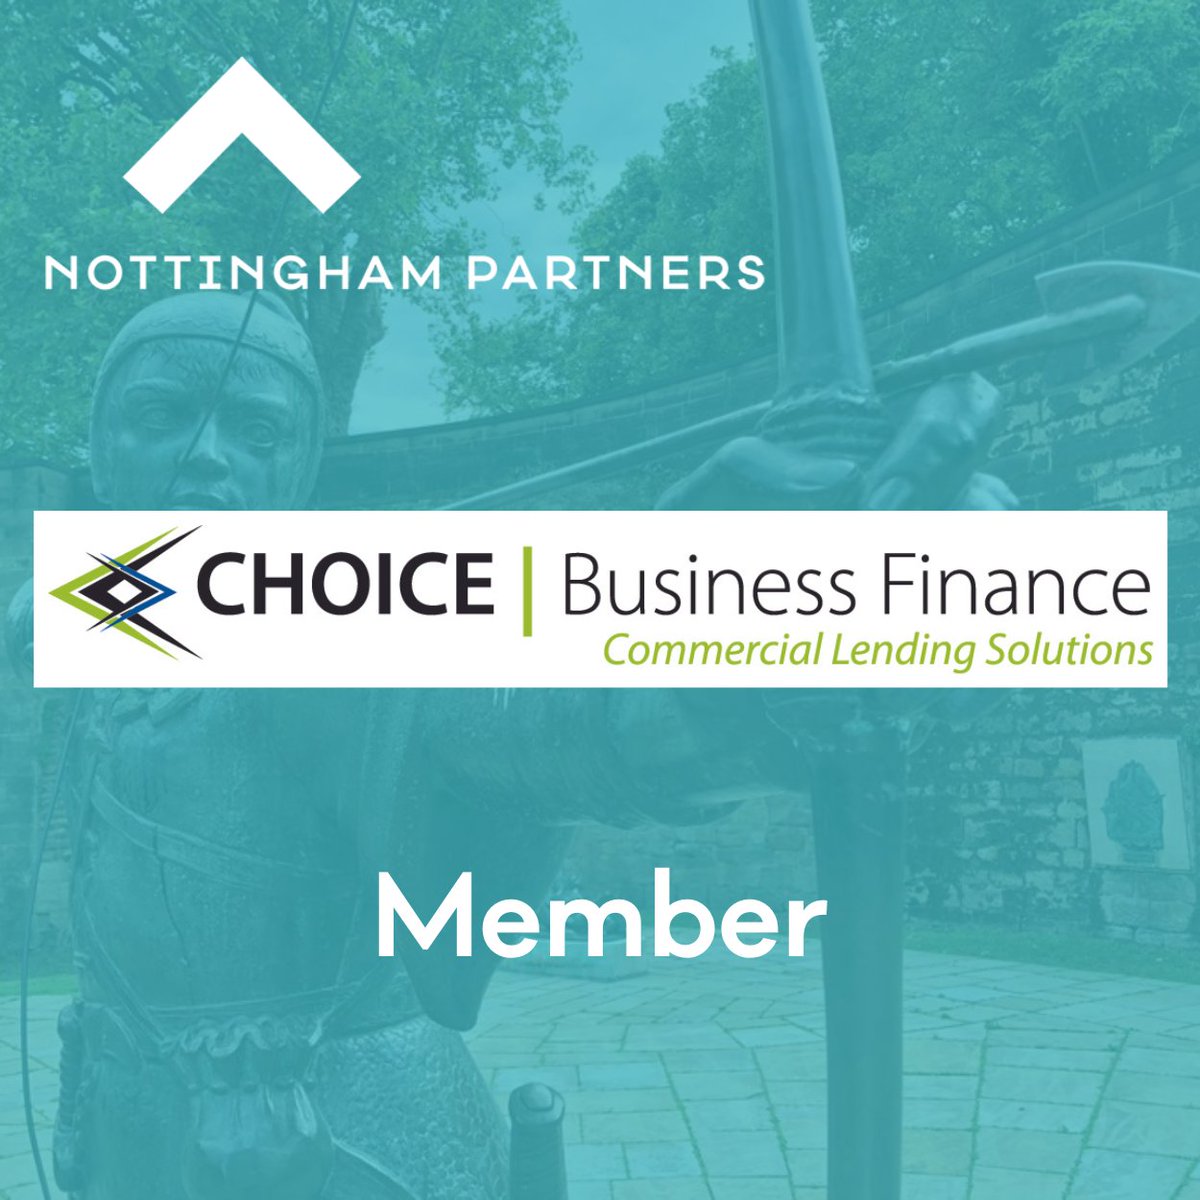 We're delighted to announce that @ChoiceBusiness4 has become a Nottingham Partners member! Choice Business Finance is a Nottingham based brokerage that sources business & commercial finance. Find out more here👇 ow.ly/neQS50QtEIY